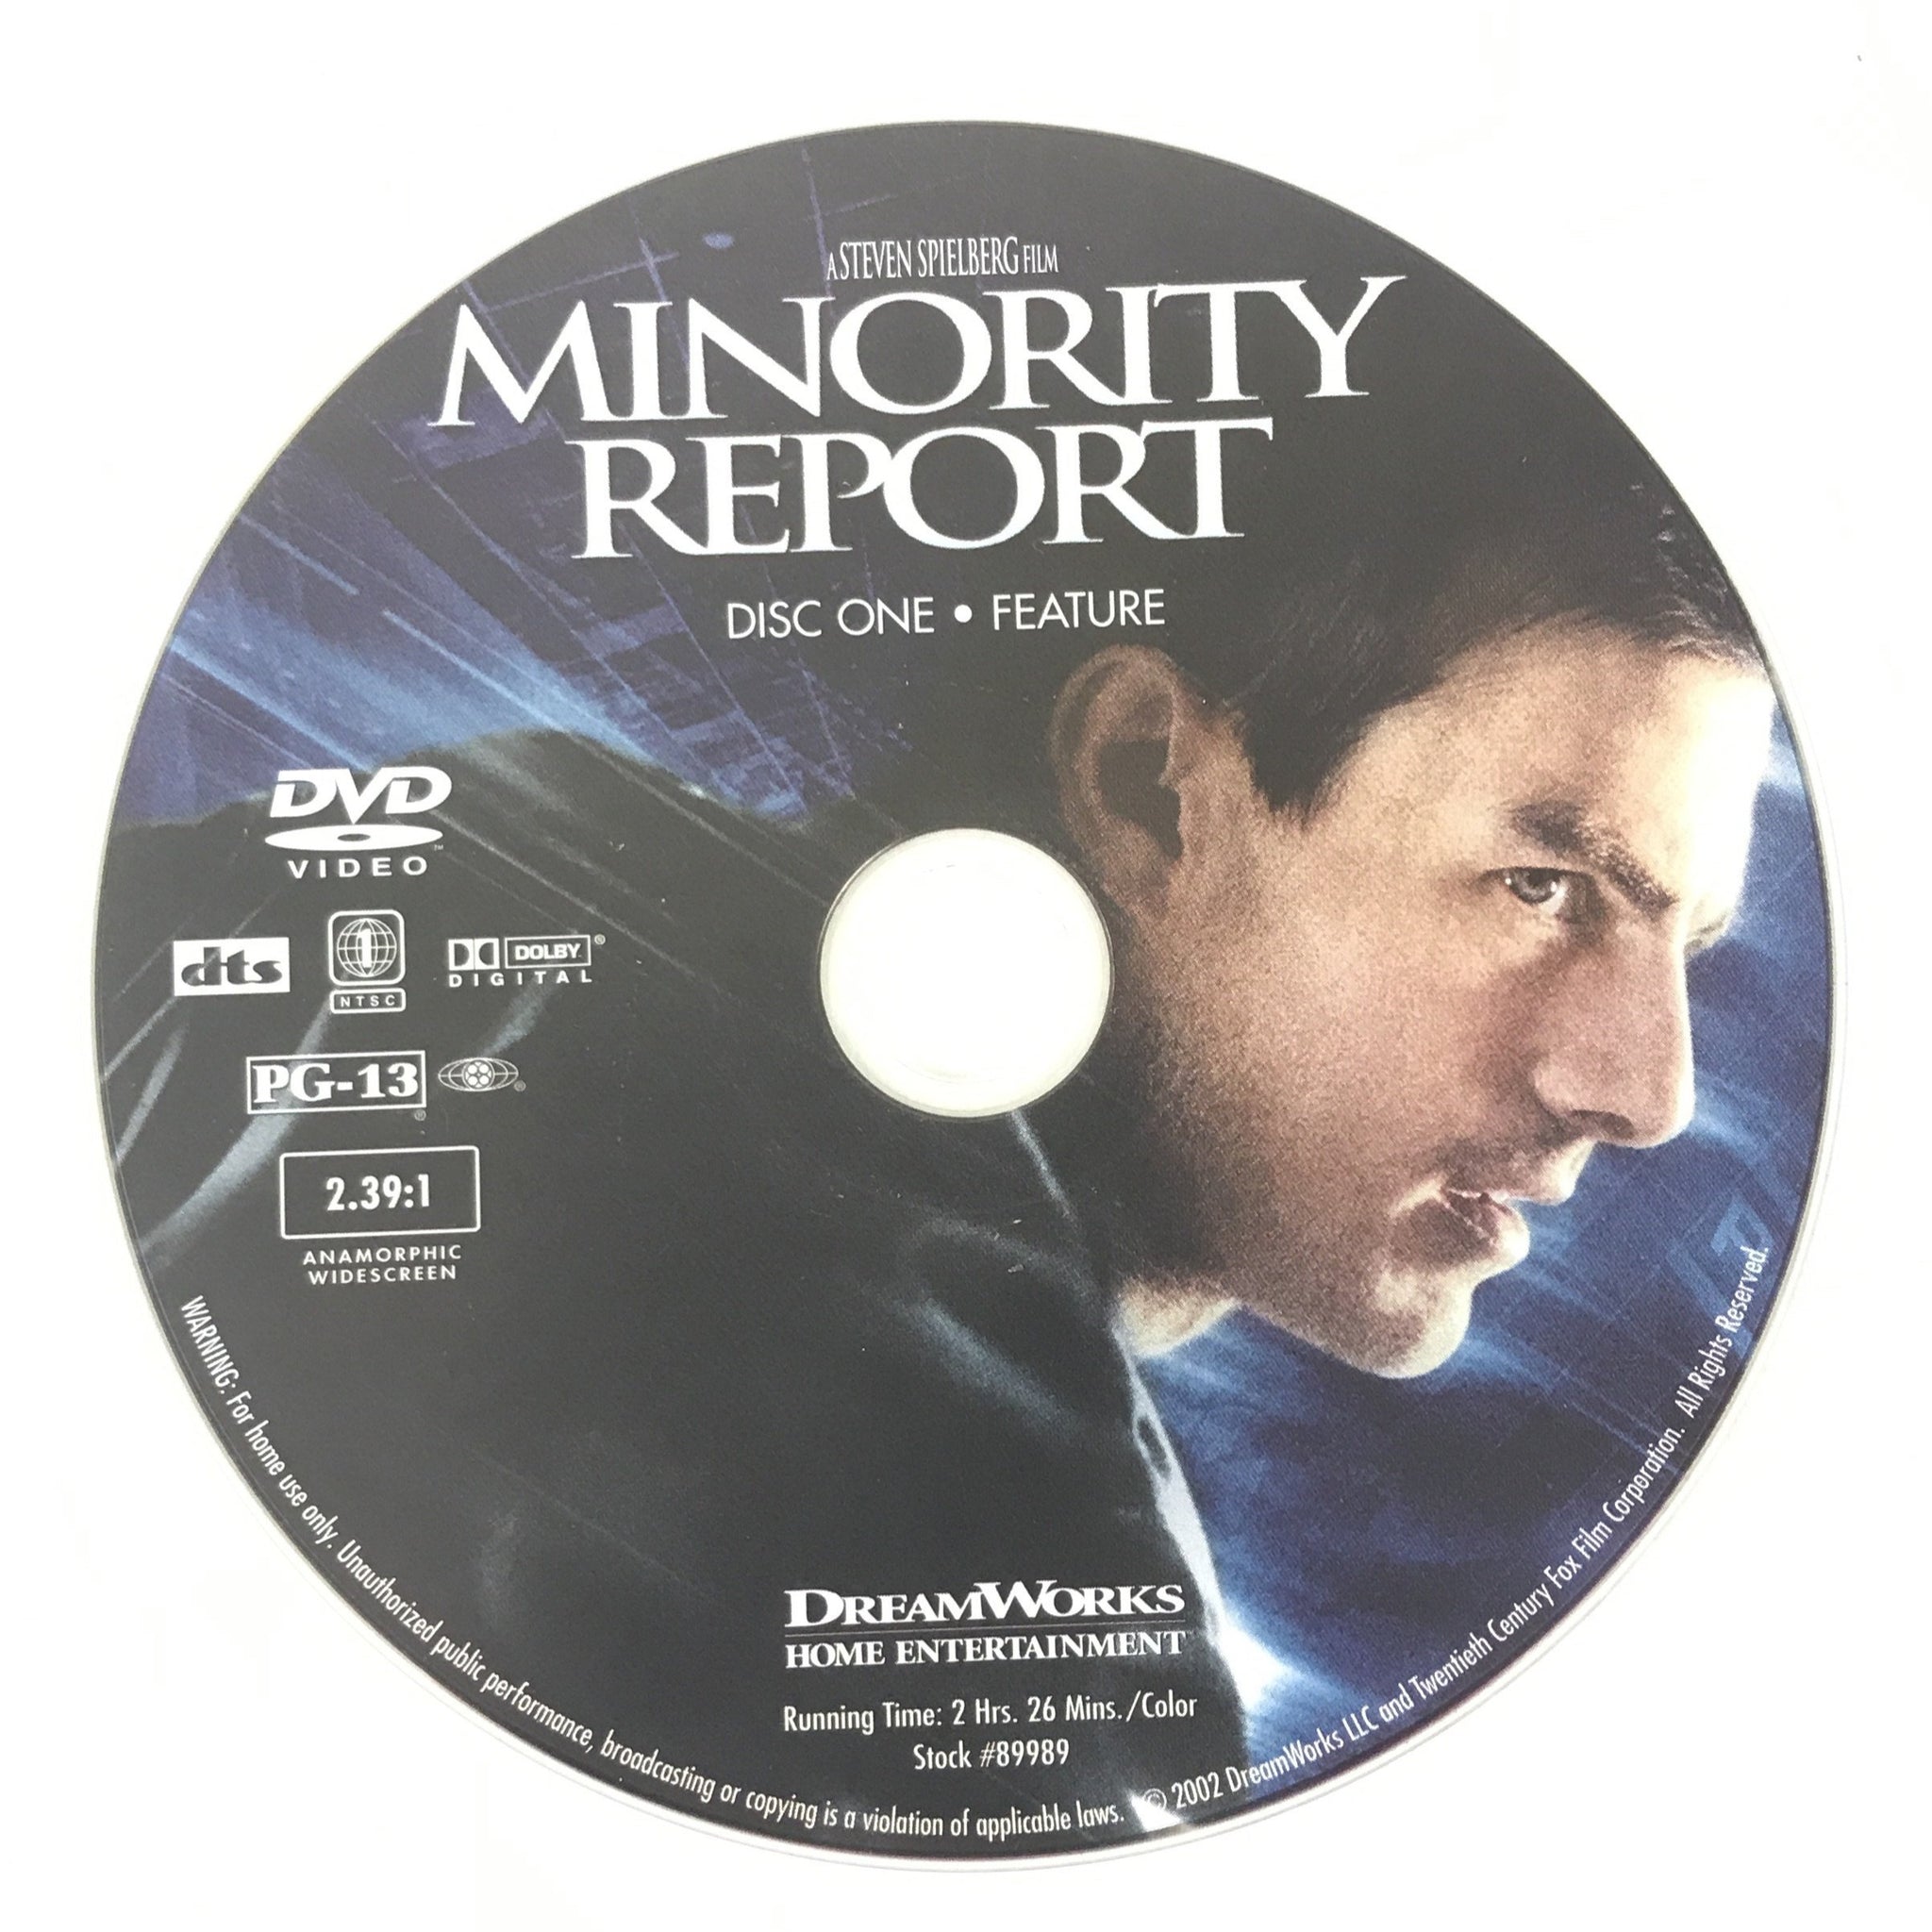 Minority Report (DVD, Widescreen) Tom Cruise - DISC ONLY